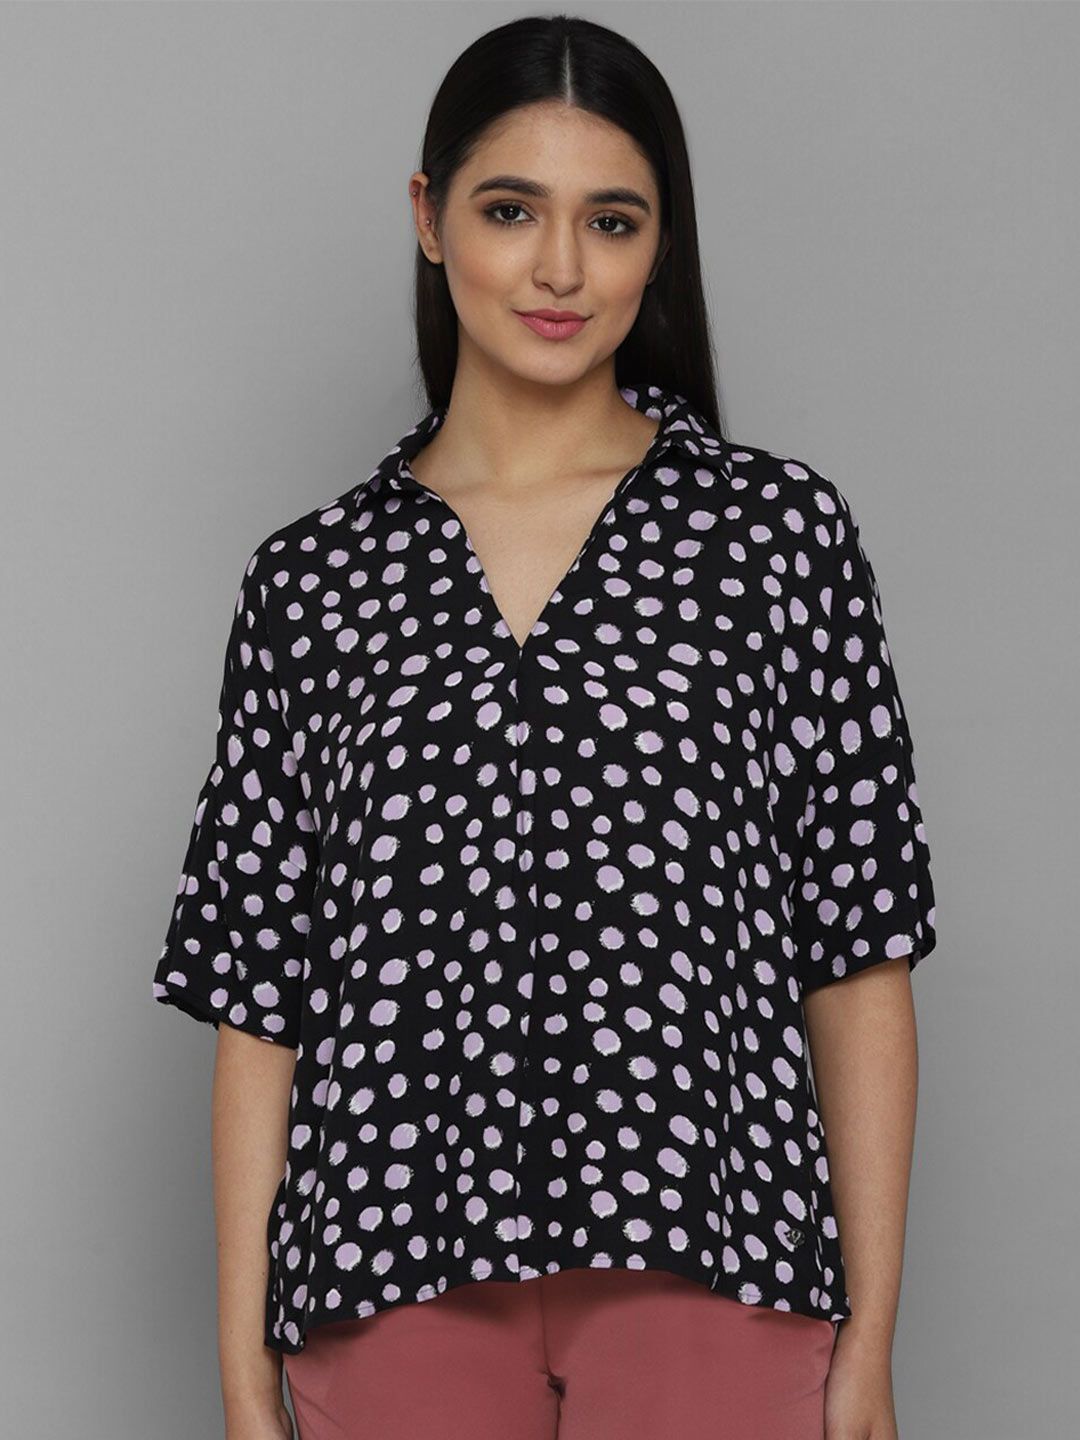 Allen Solly Woman Black Printed Boxy Top Price in India